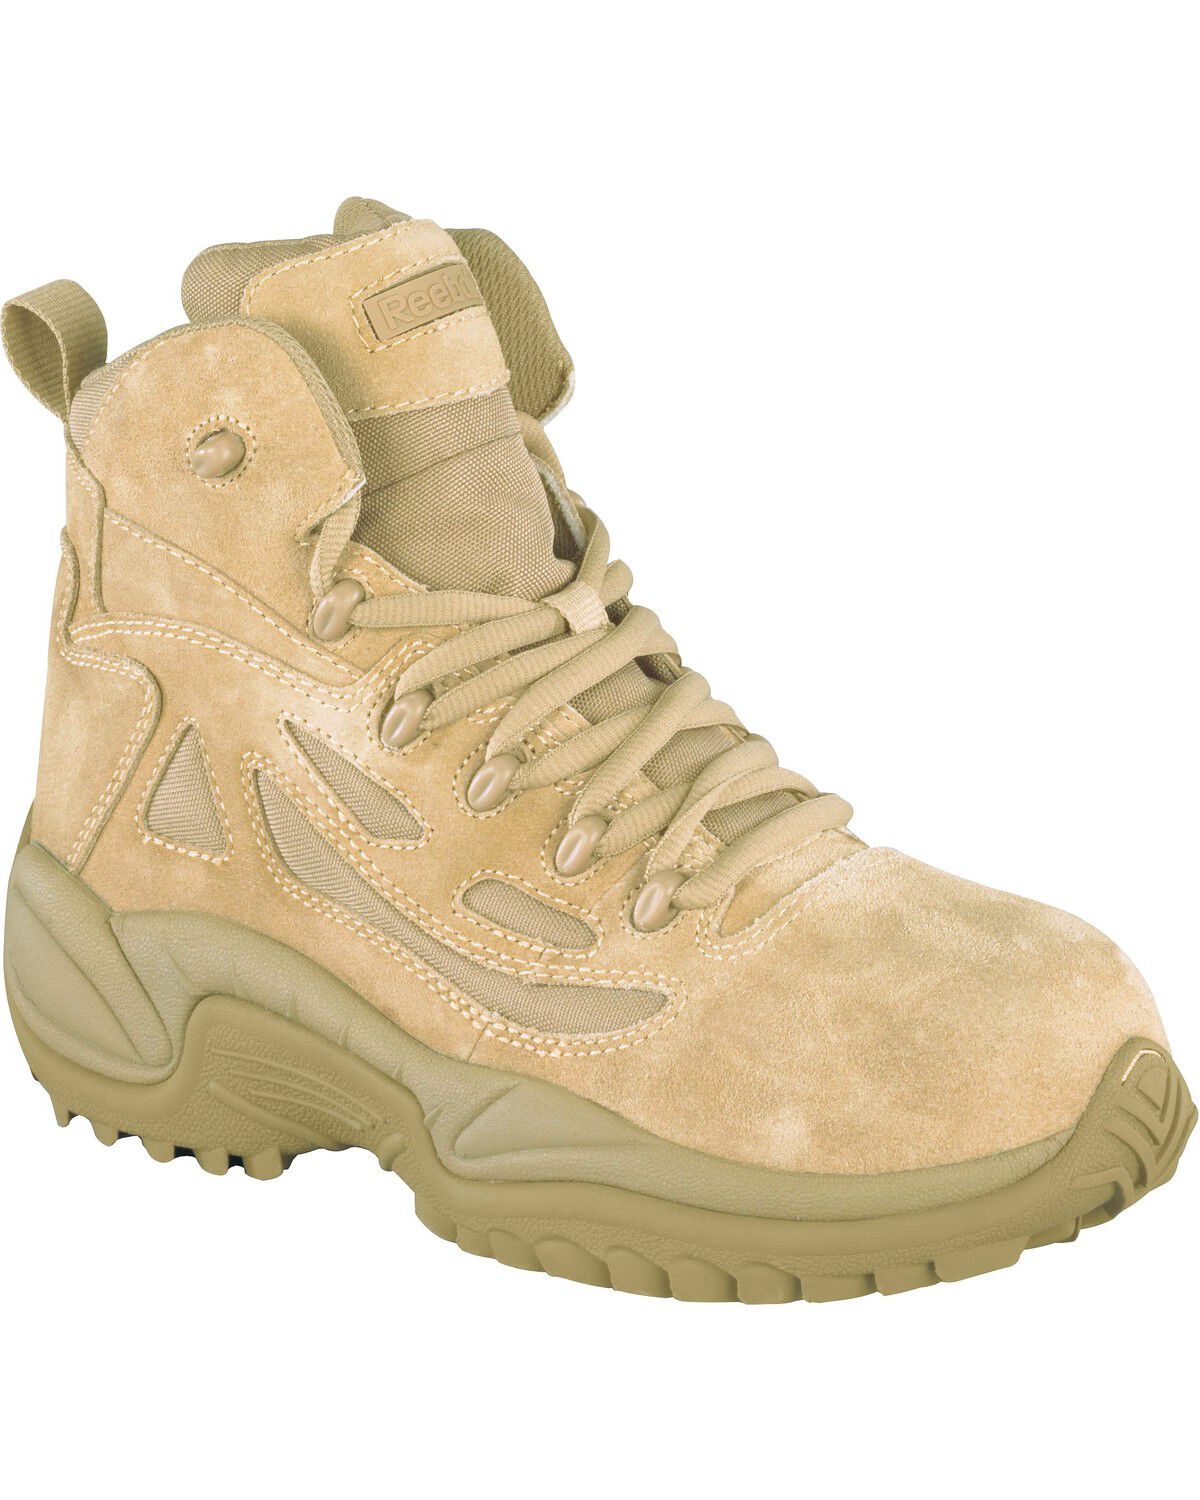 Tactical Work Boots - Composite Toe 